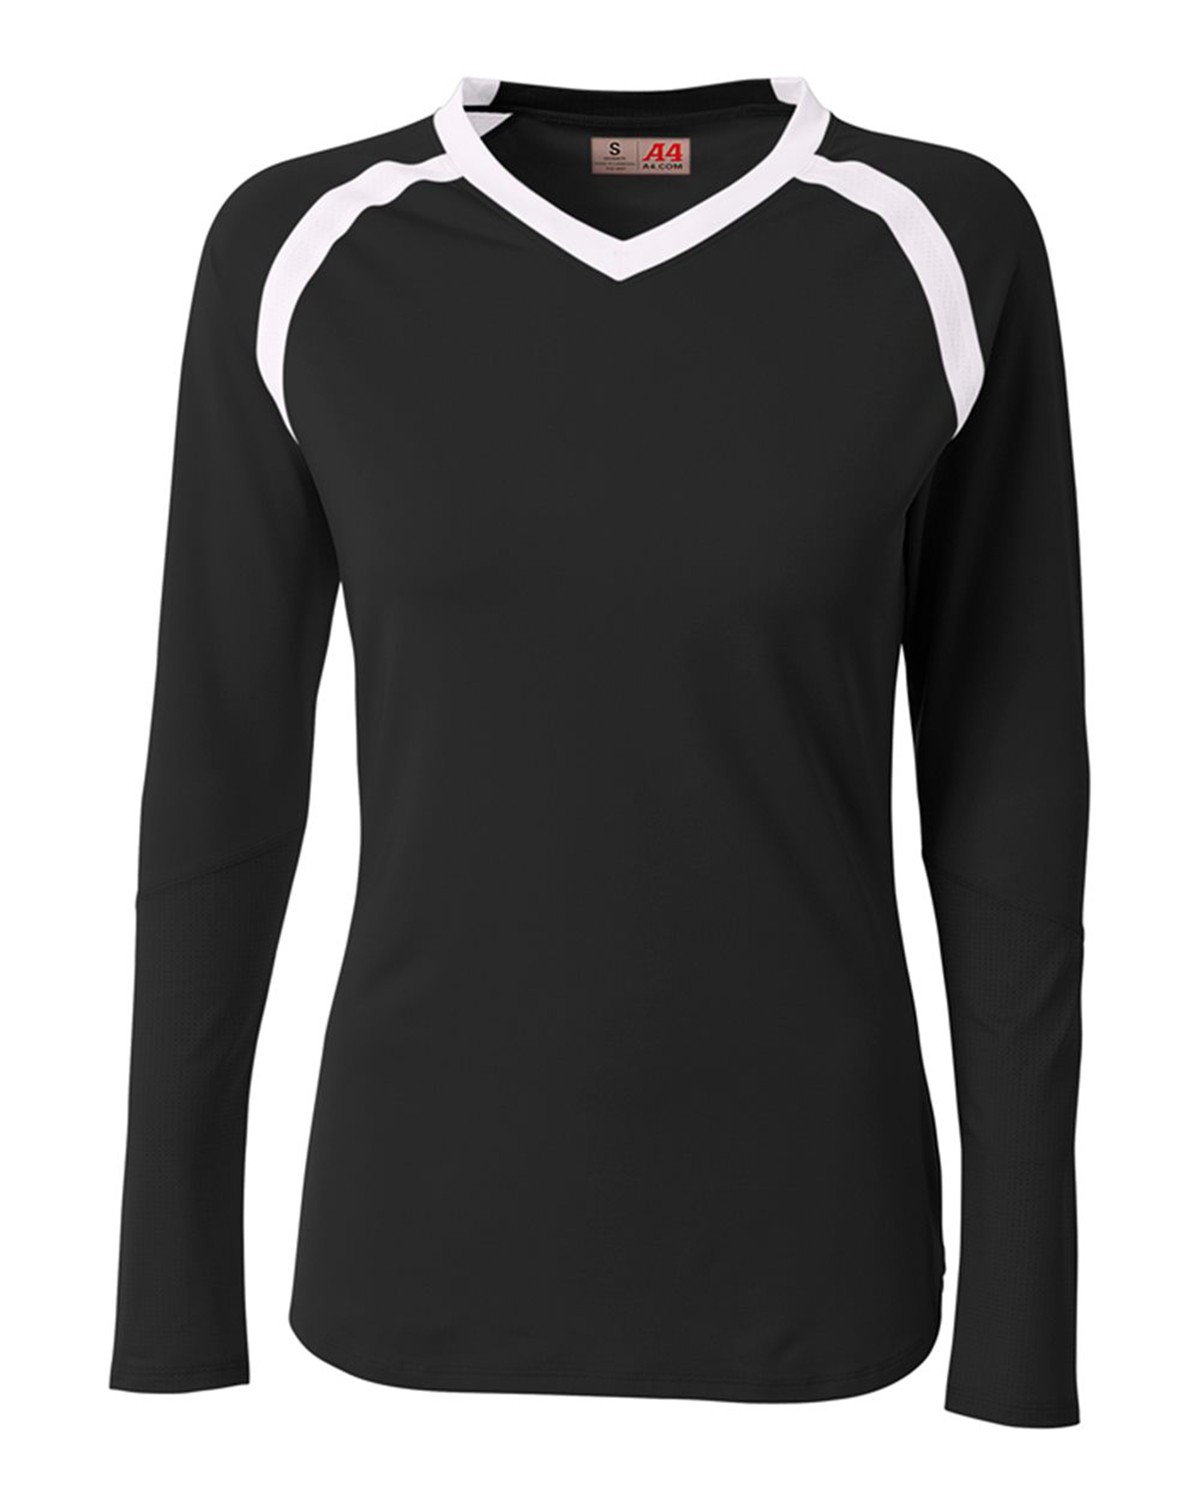 A4 NW3020 Ladies Ace Long Sleeve Volleyball Jersey